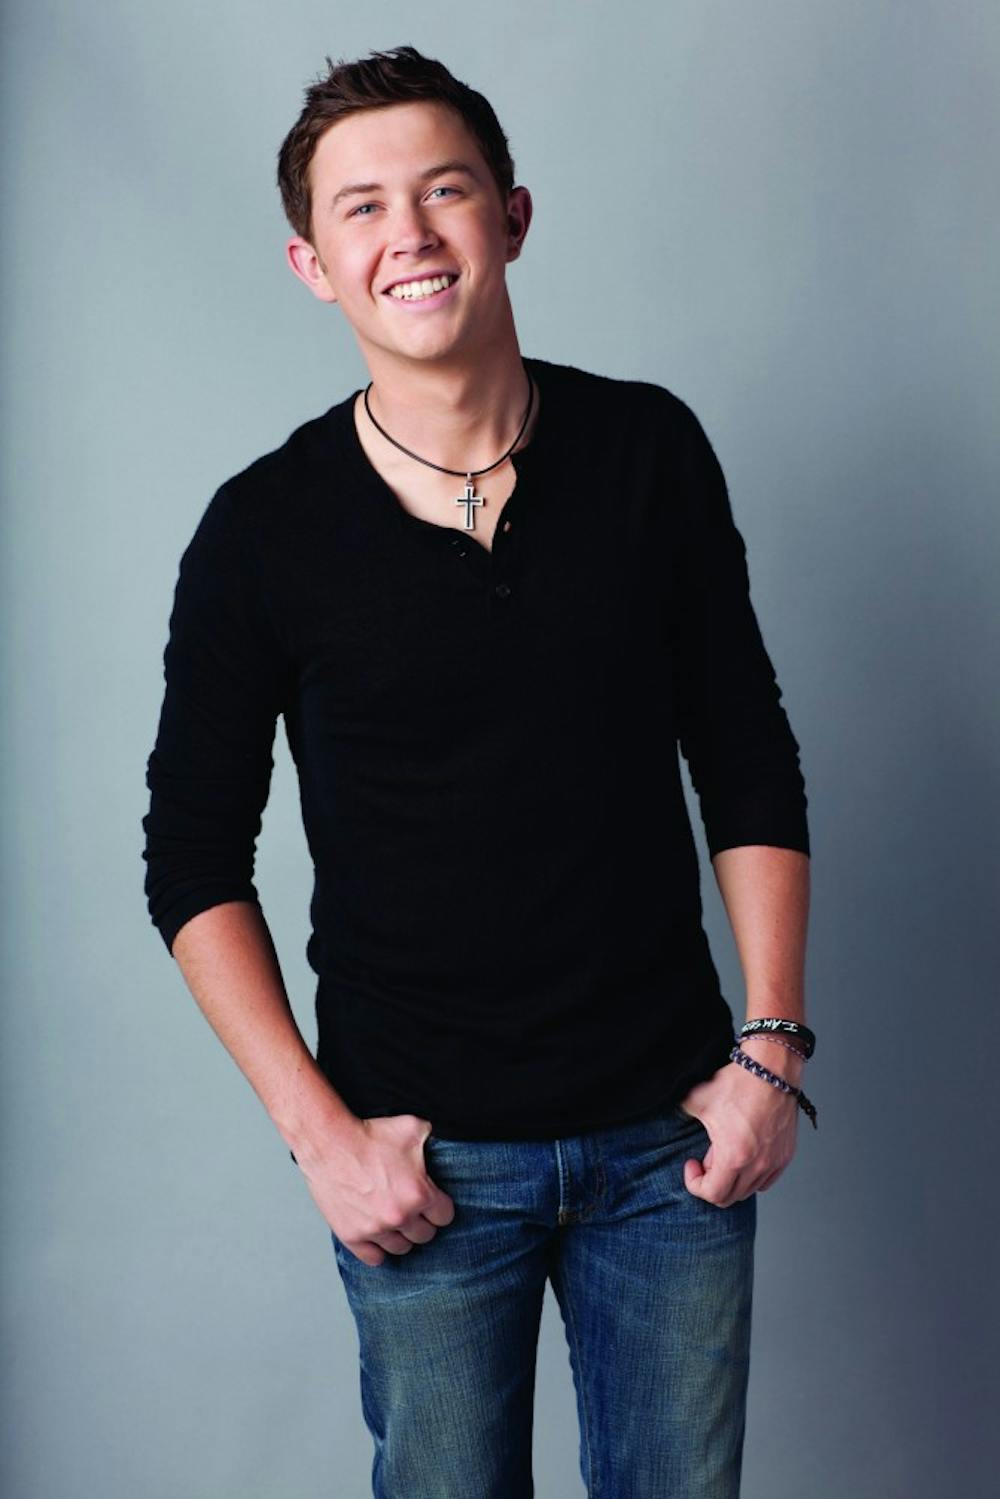 American Idol Scotty McCreery to perform at Luhrs